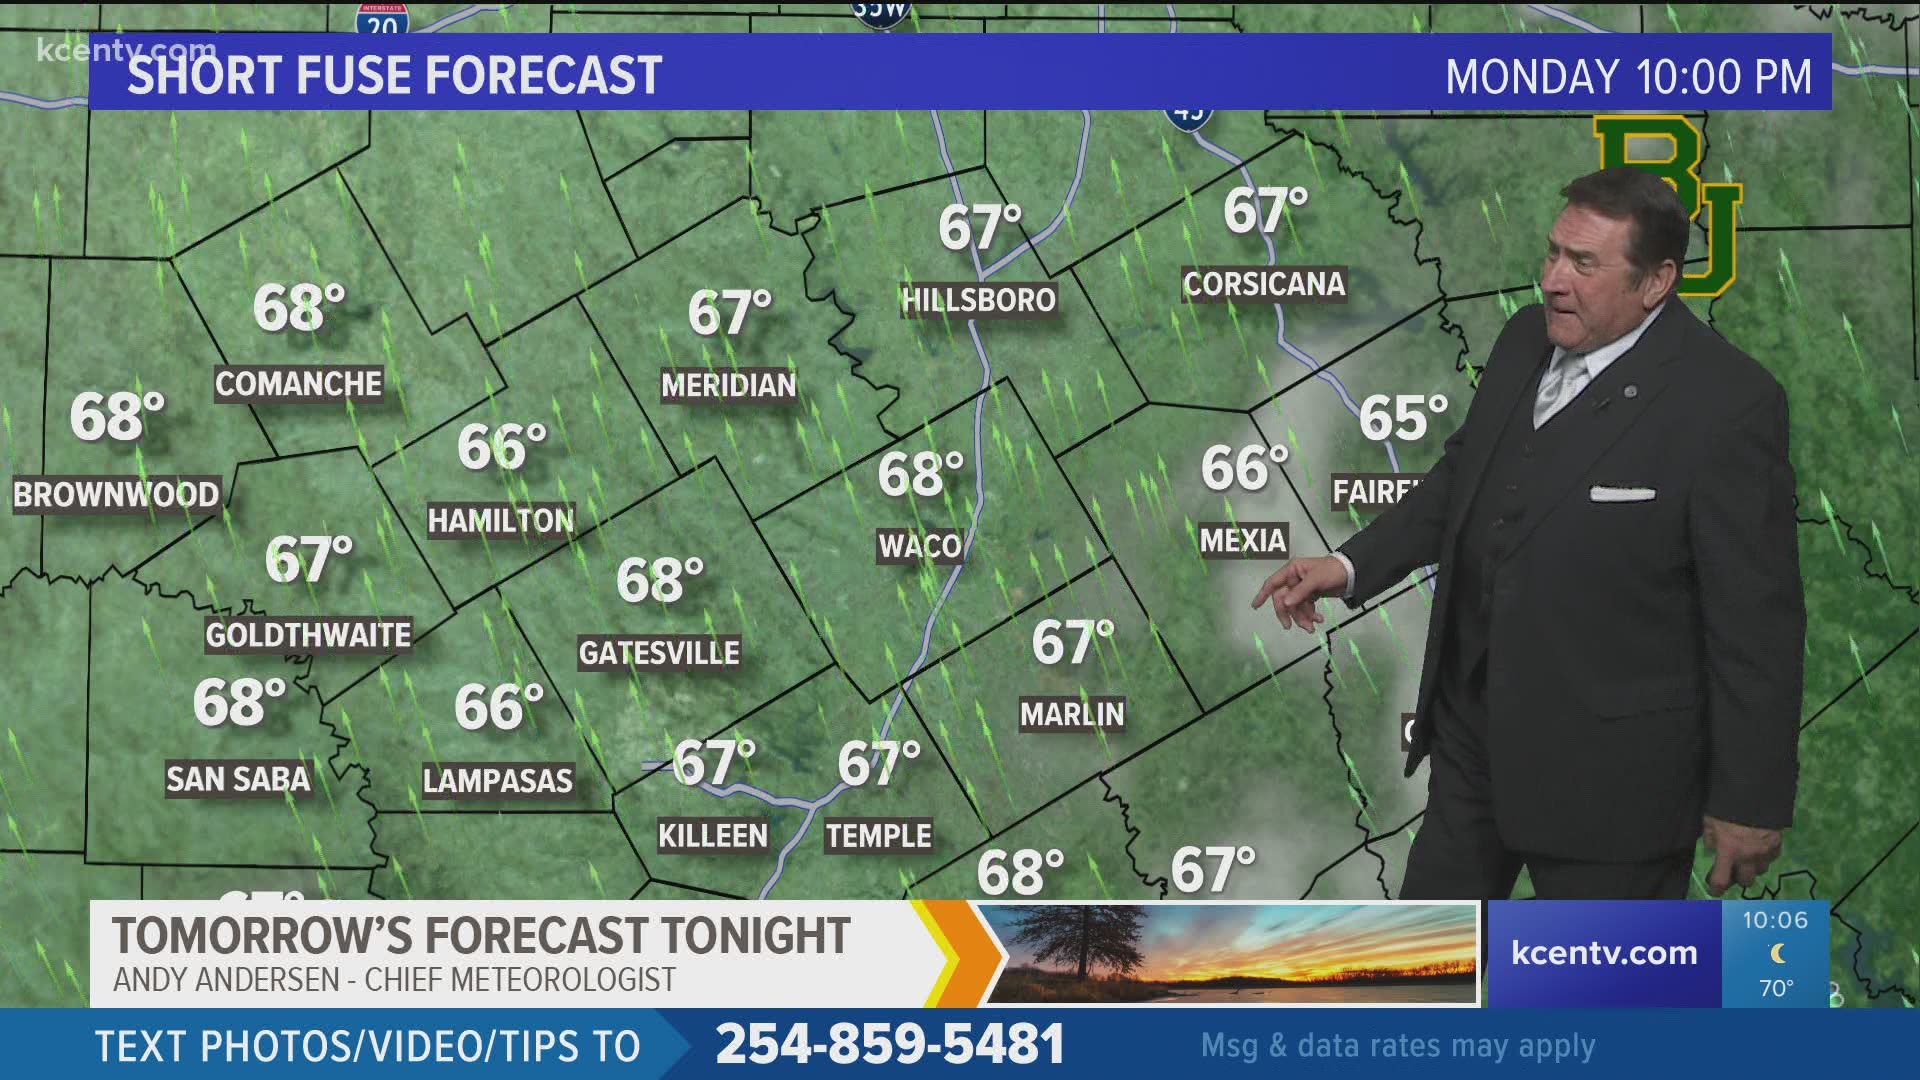 We're in for some pleasant weather across Central Texas on Tuesday.